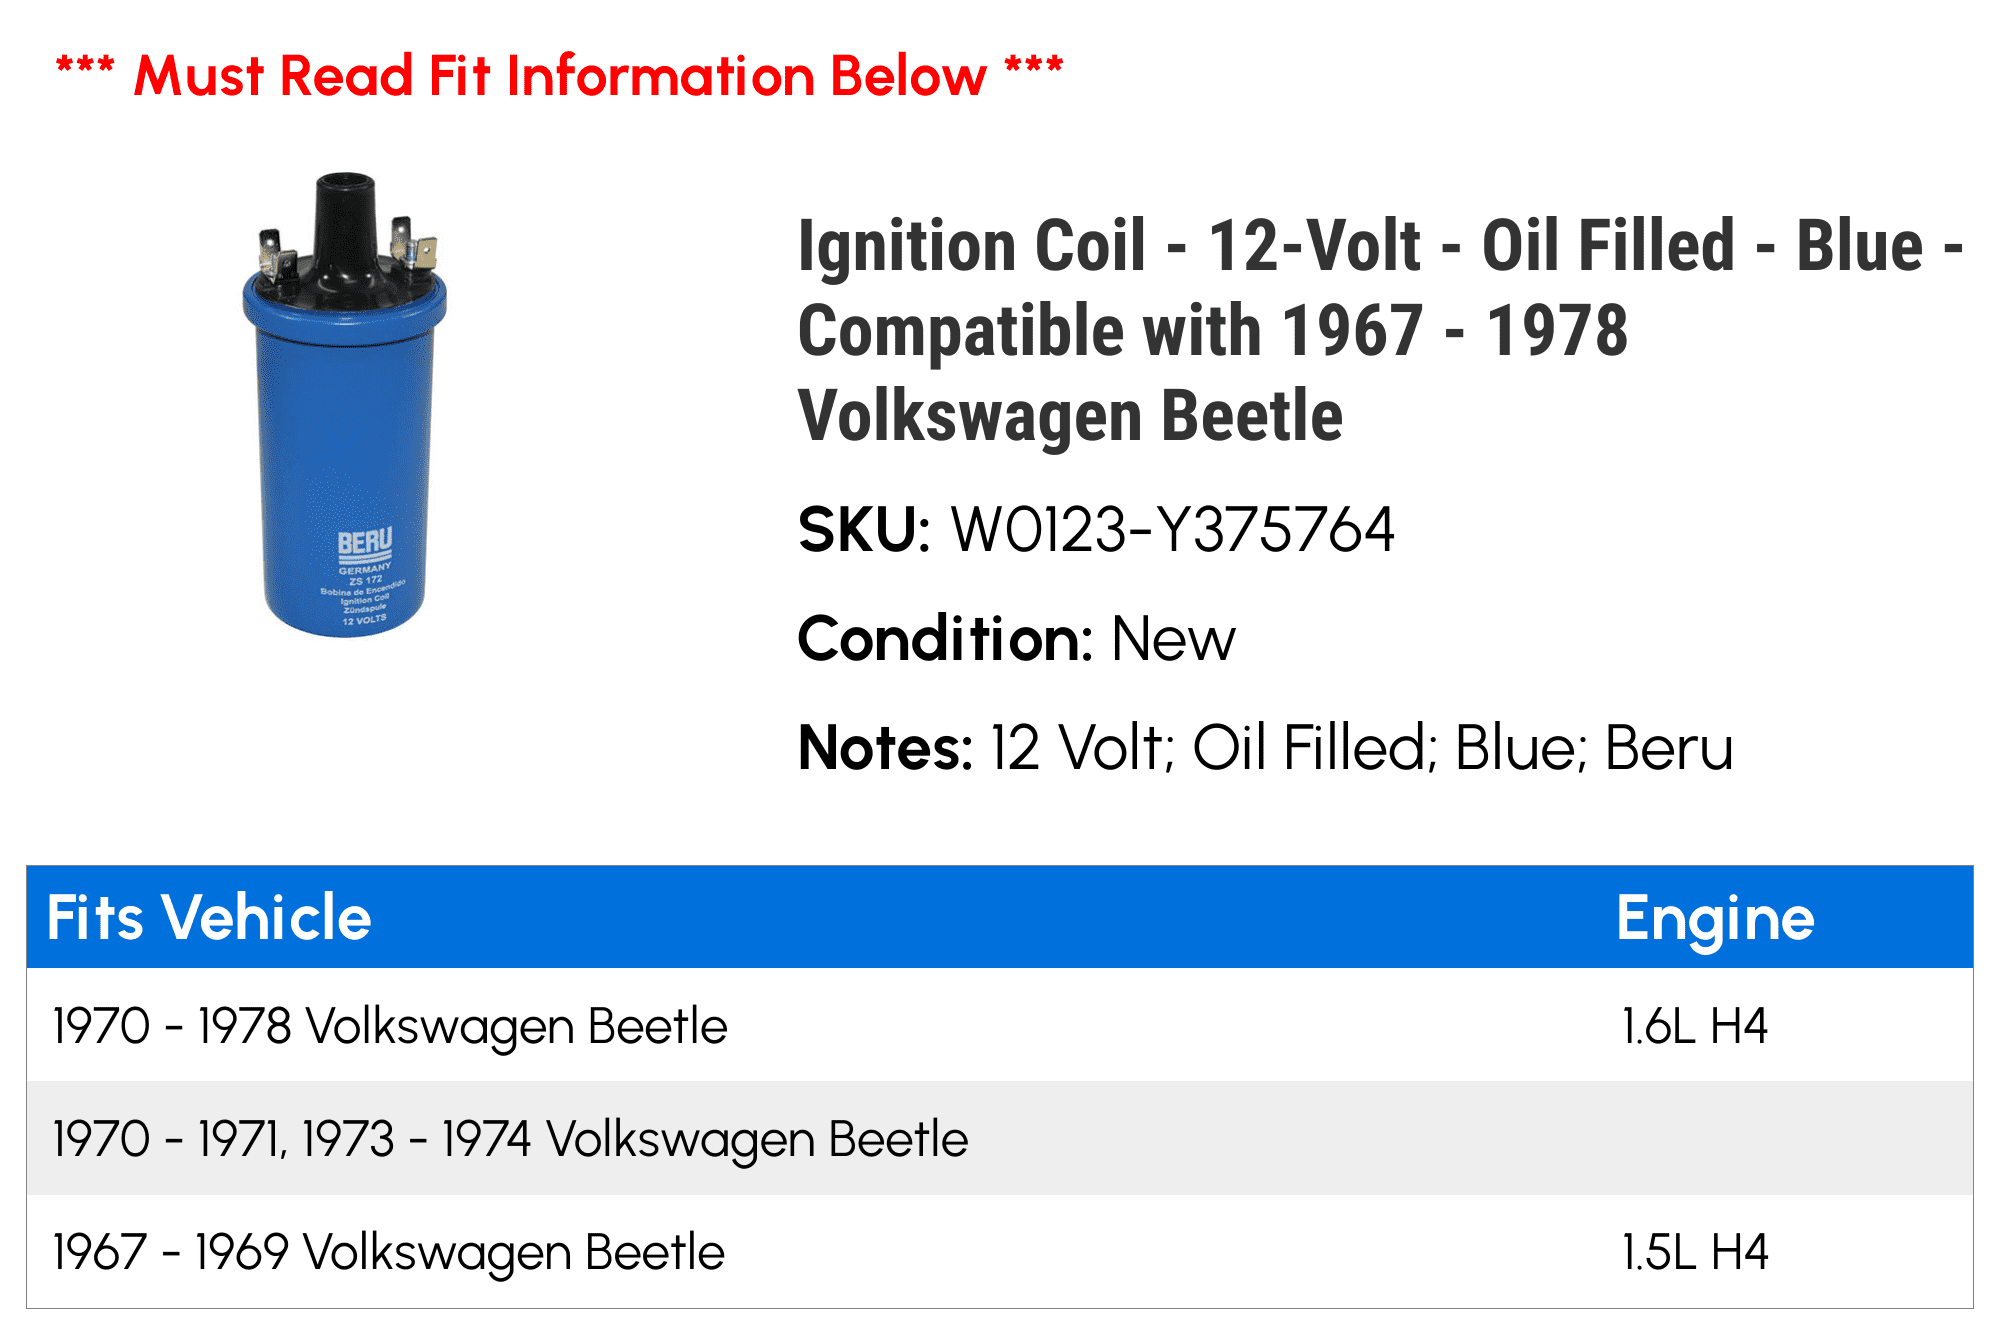 Ignition Coil - 12-Volt - Filled - Blue - Compatible with 1967